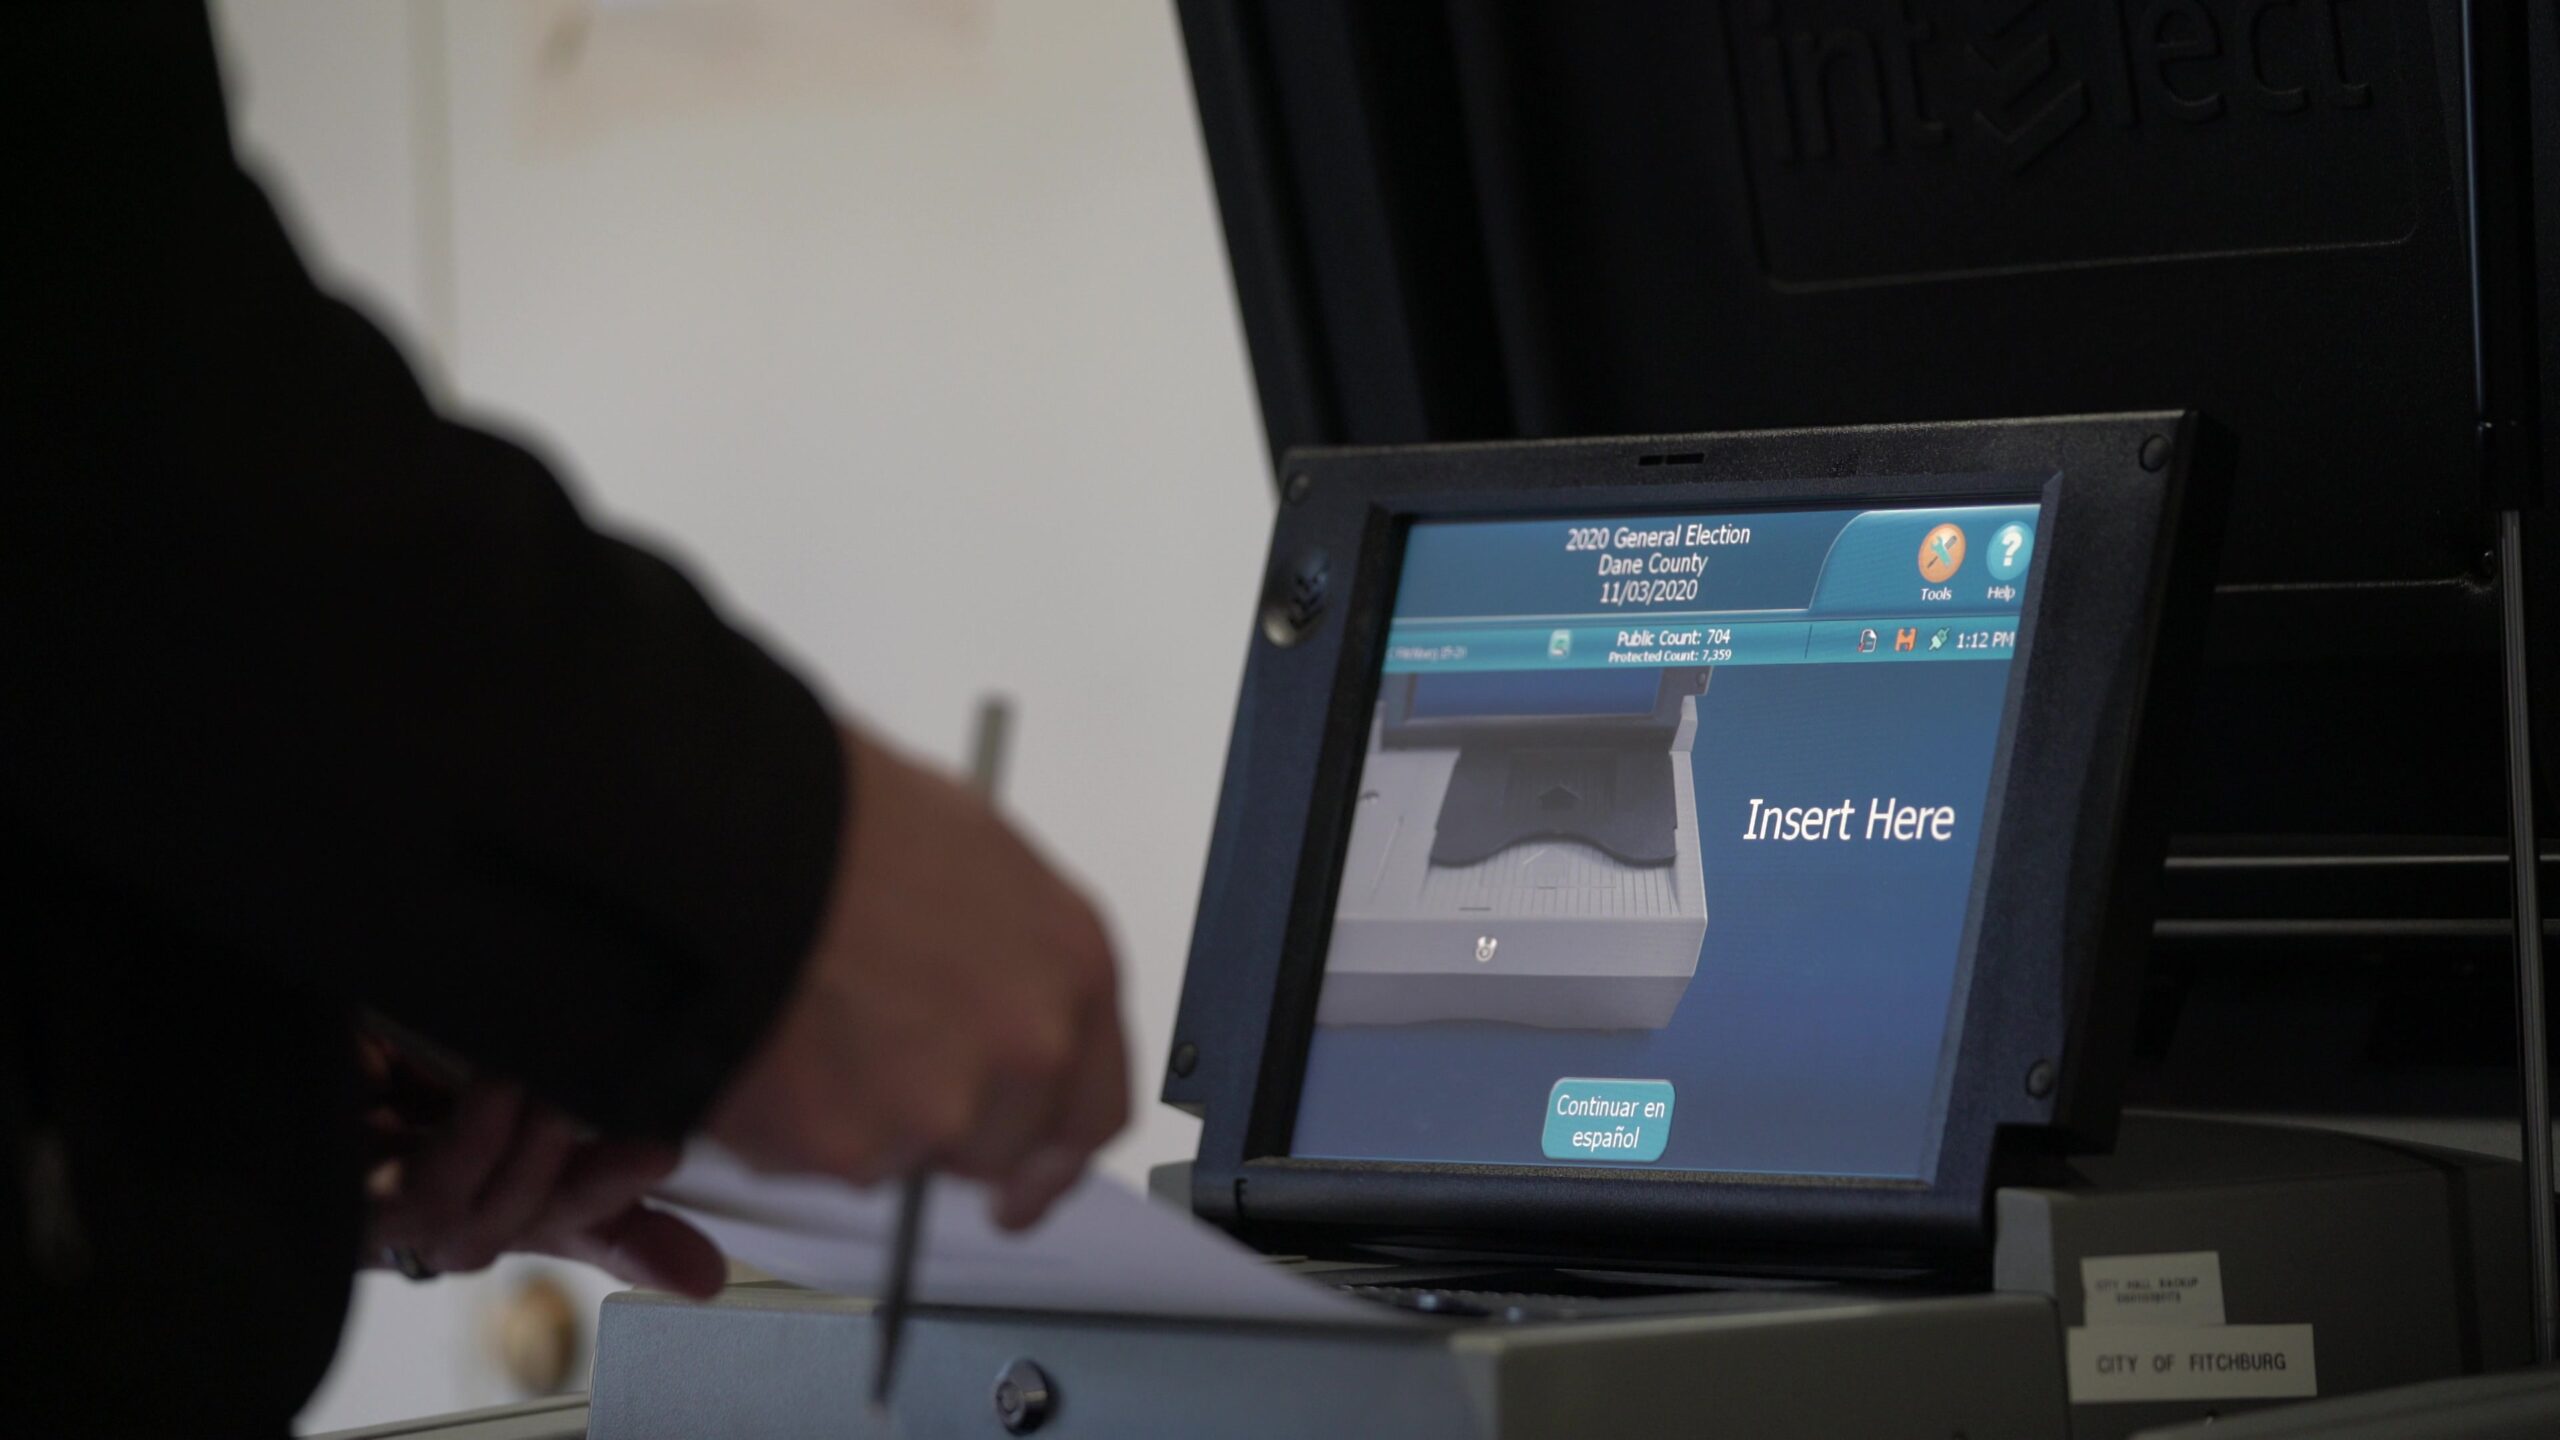 A voting tabulation machine with a touch screen graphic shows instructions while a voter enters a paper ballot into it.